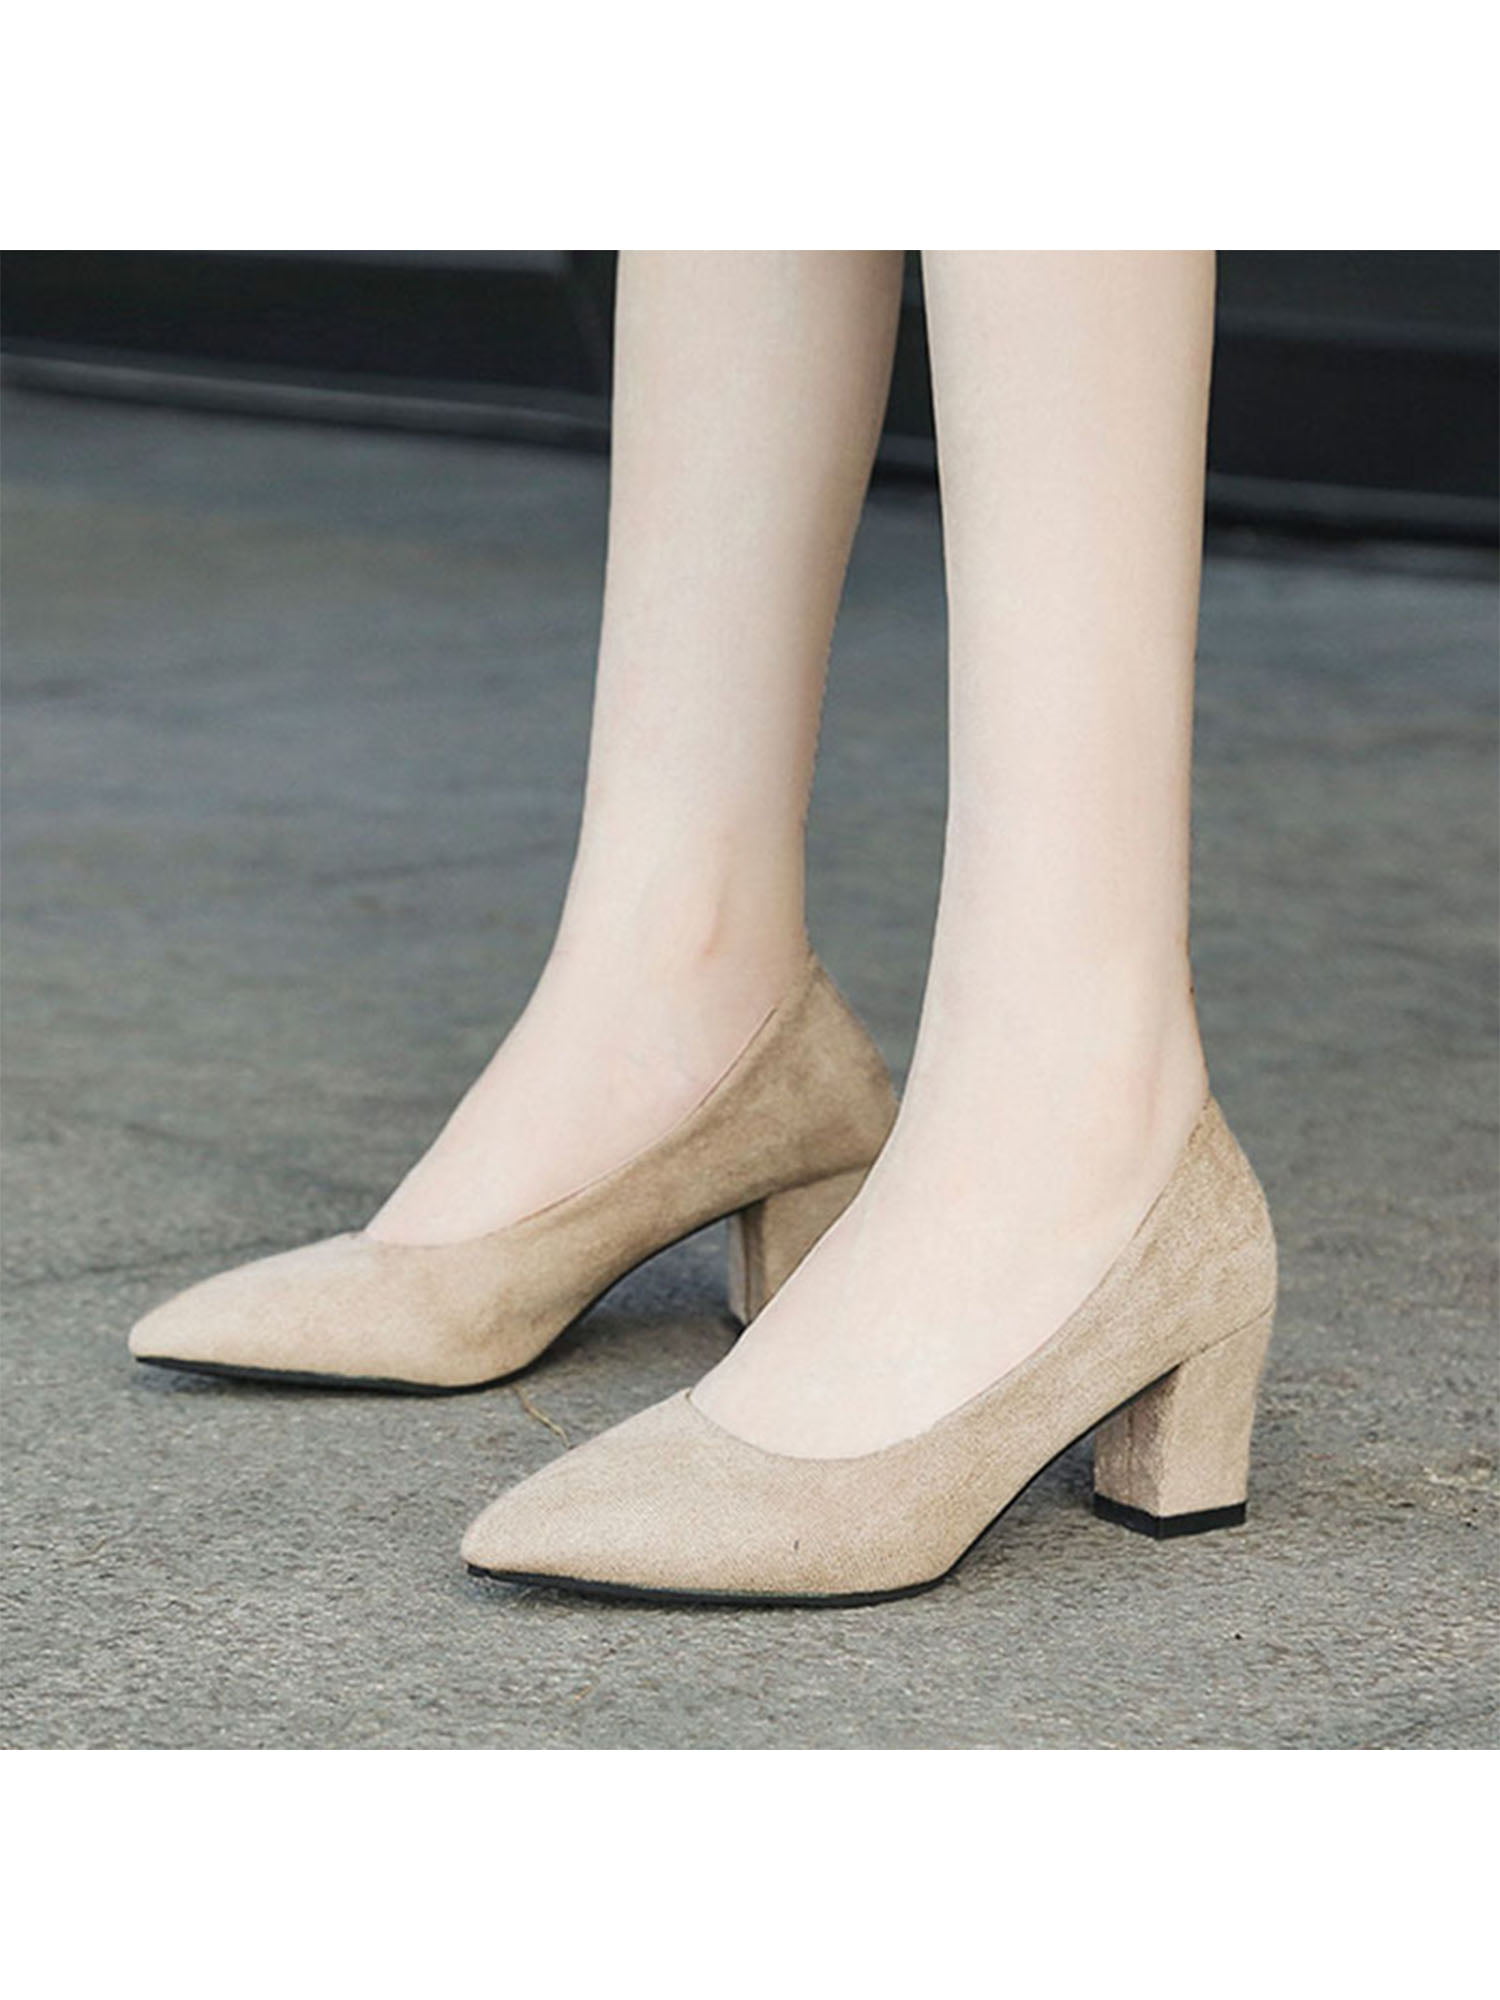 Details about   Women's Pointy Shoes Toe Faux Suede High Heel Stiletto Party OL Shoes Slip On